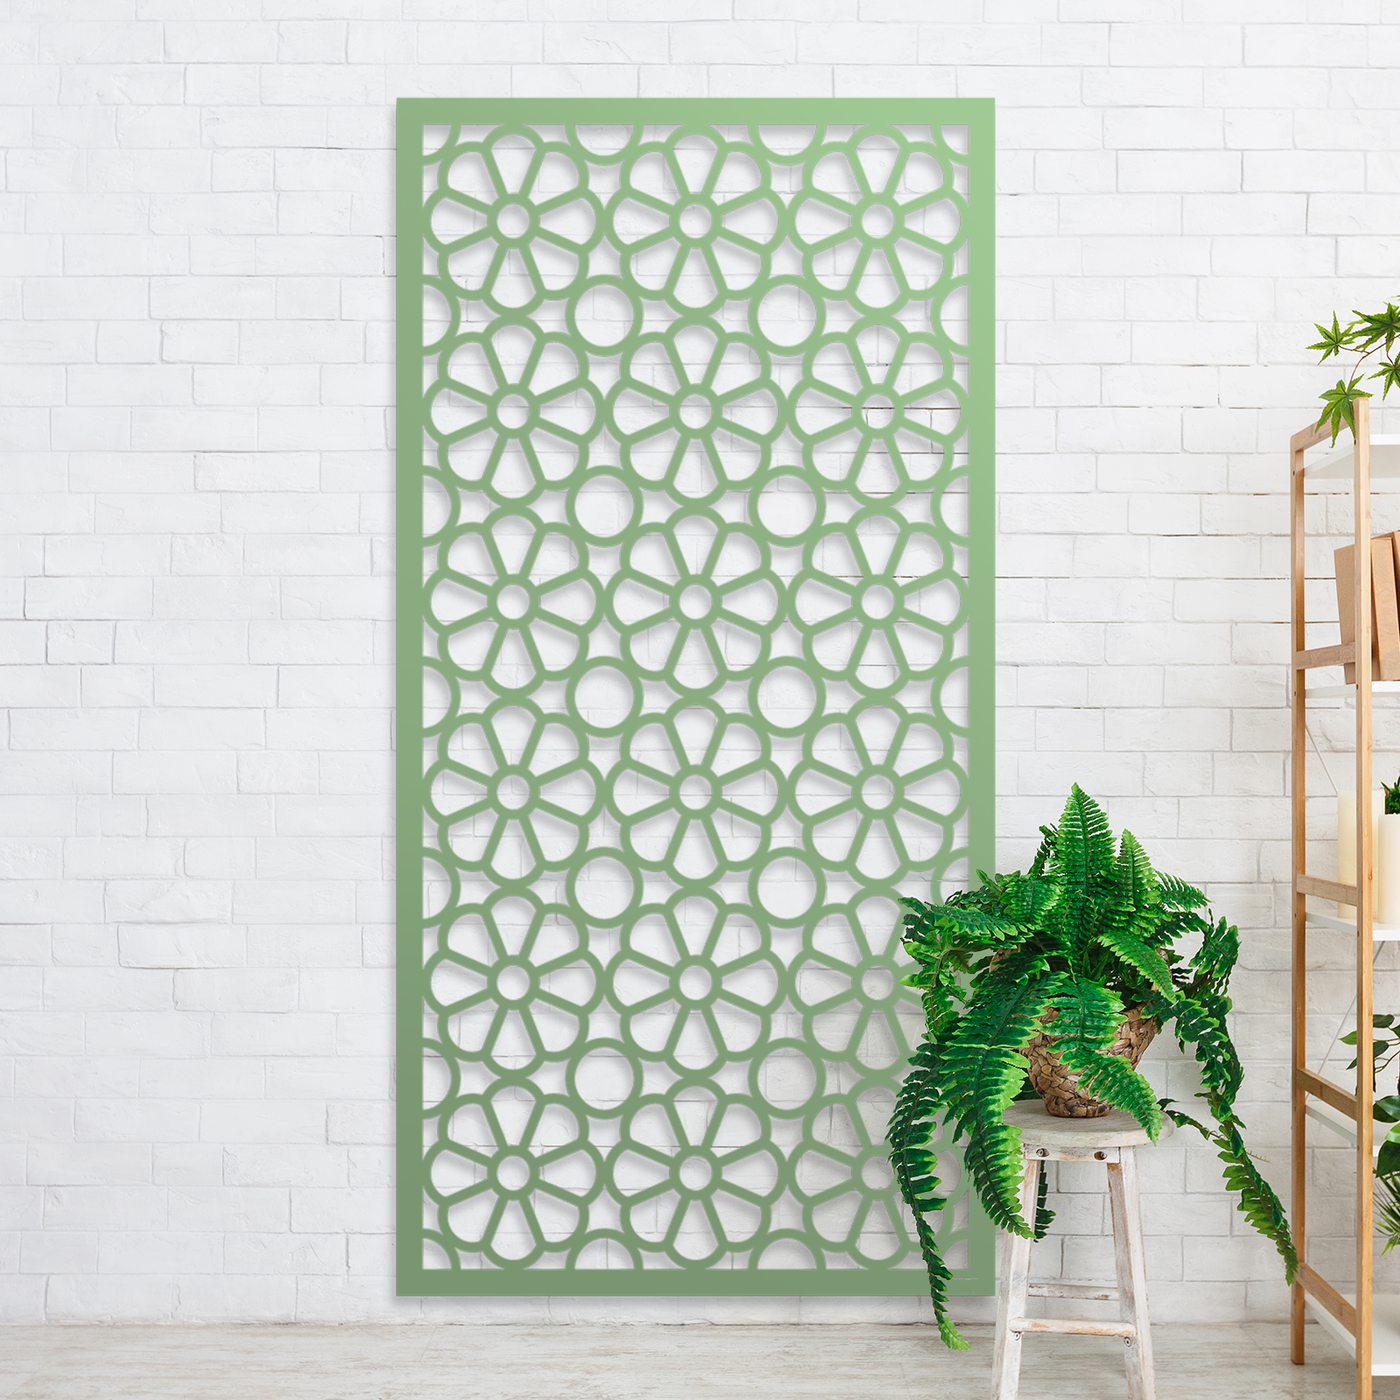 Springtime Metal Screen: Perfect for Enhancing Your Outdoor Living Space